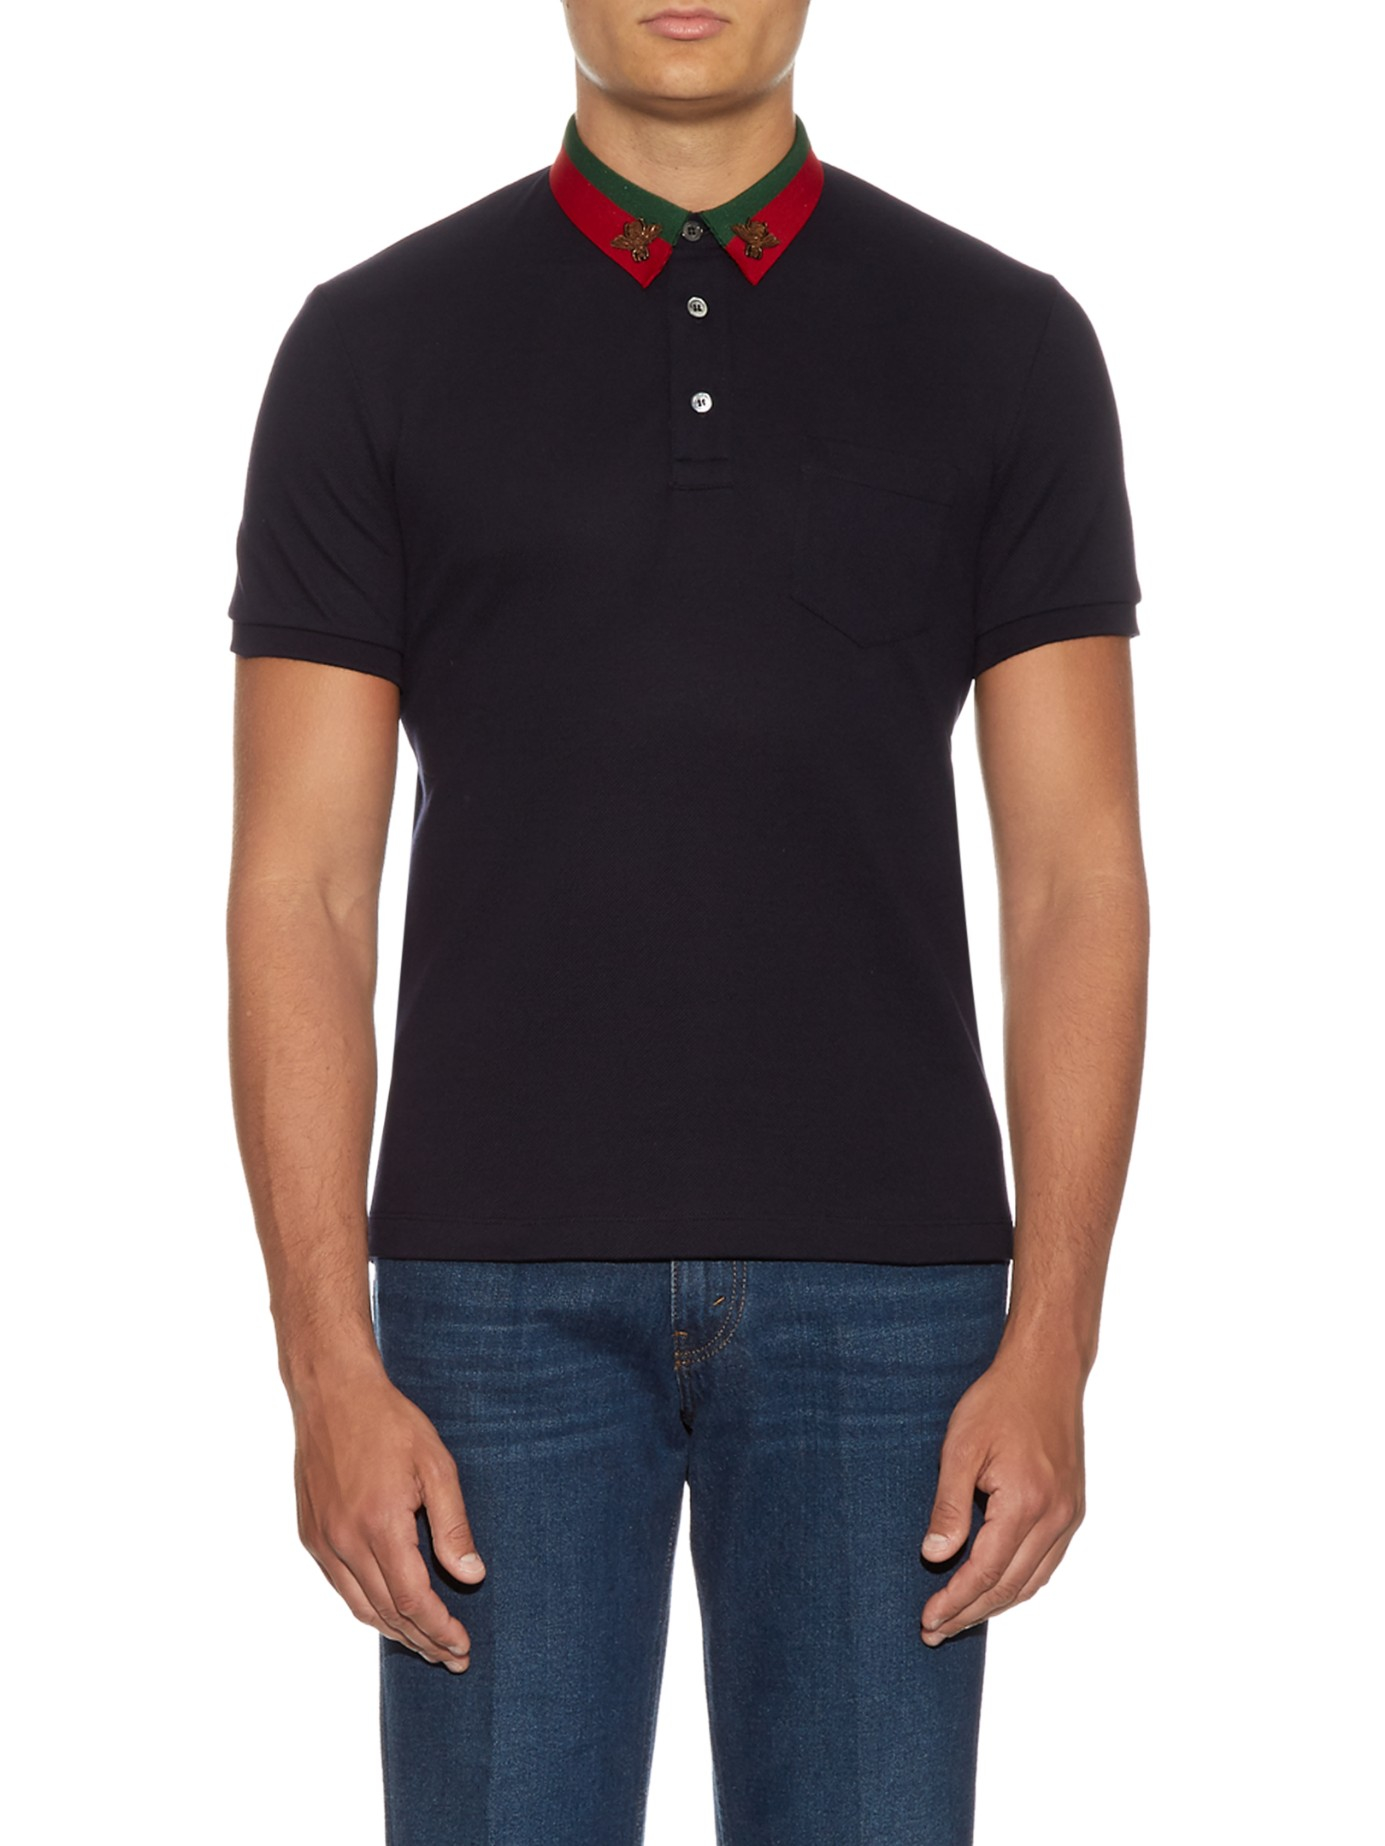 Gucci Cotton Bee-embroidered Piqué Polo Shirt in Blue for Men - Lyst